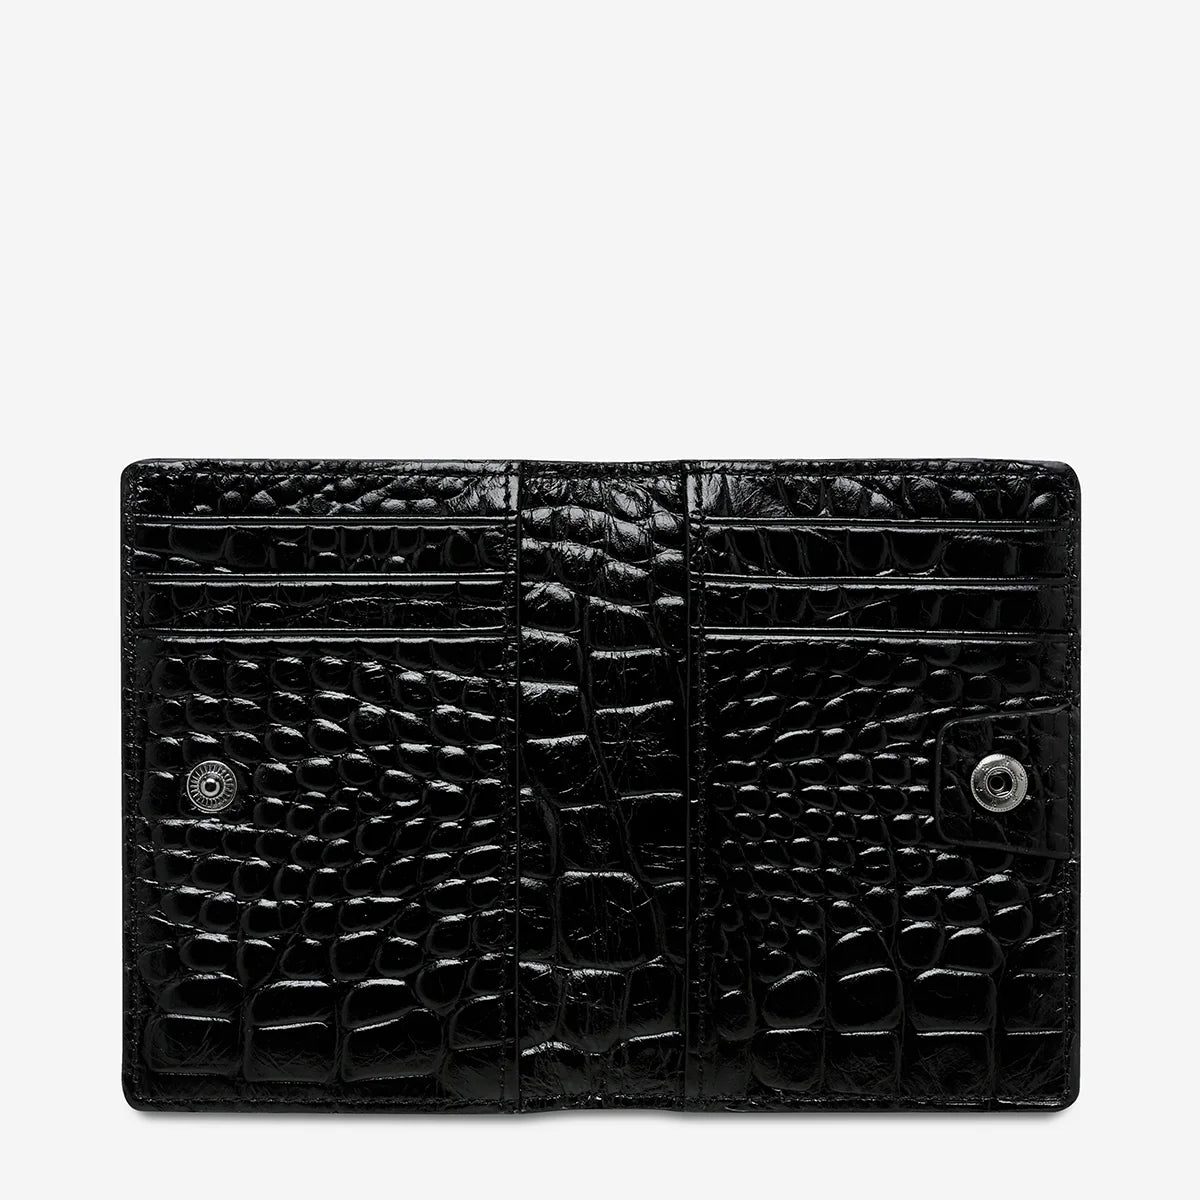 STATUS ANXIETY // Easy Does It BLACK CROC EMBOSS